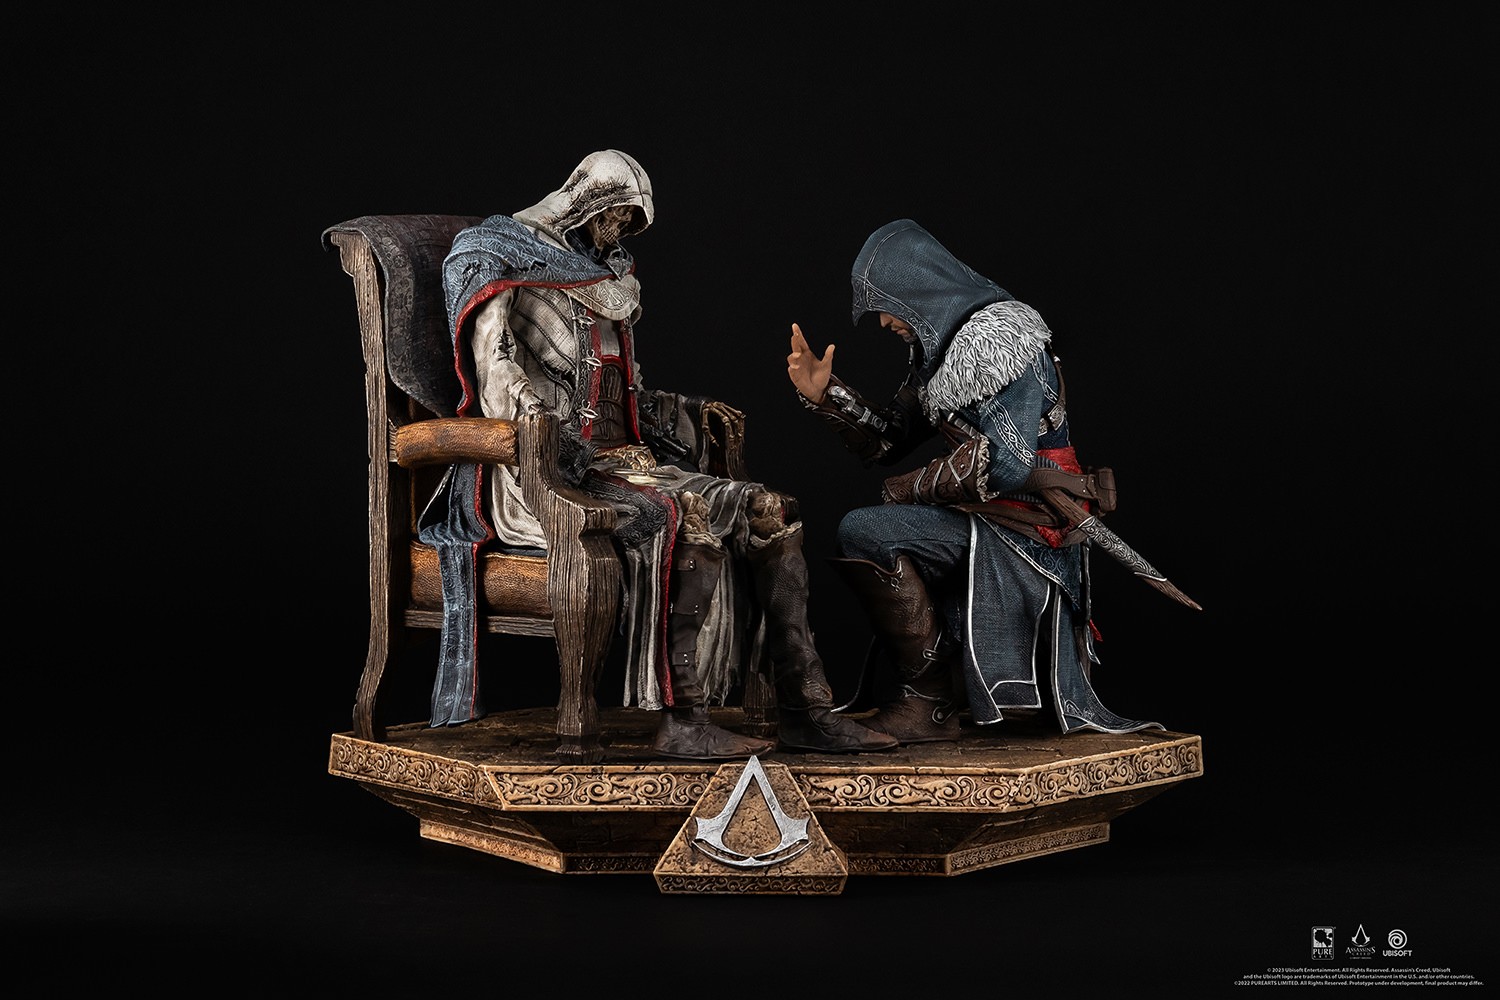 Assassin's Creed: RIP Altair- Prototype Shown